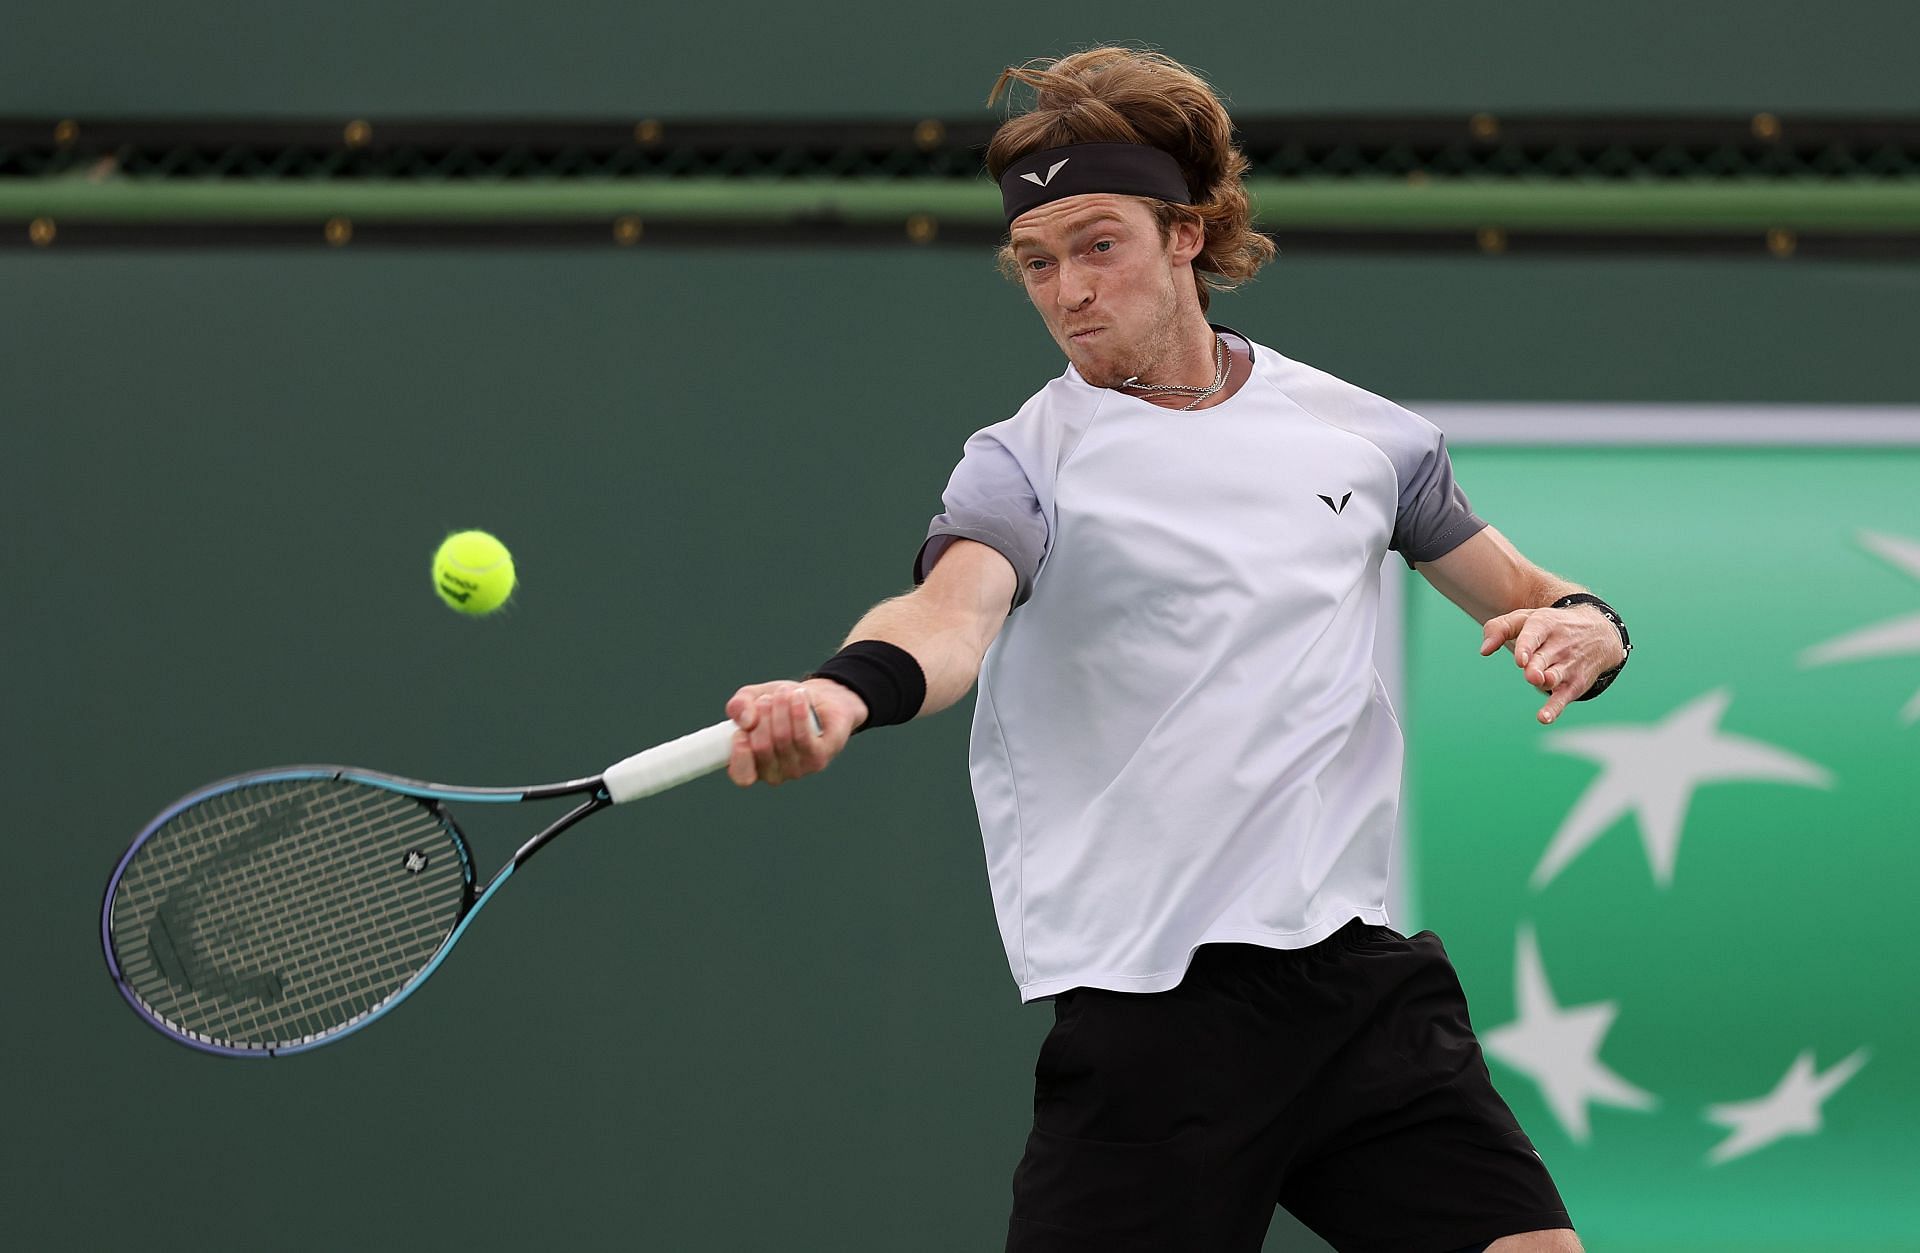 Andrey Rublev takes on Jannik Sinner in the fourth round of the Miami Open